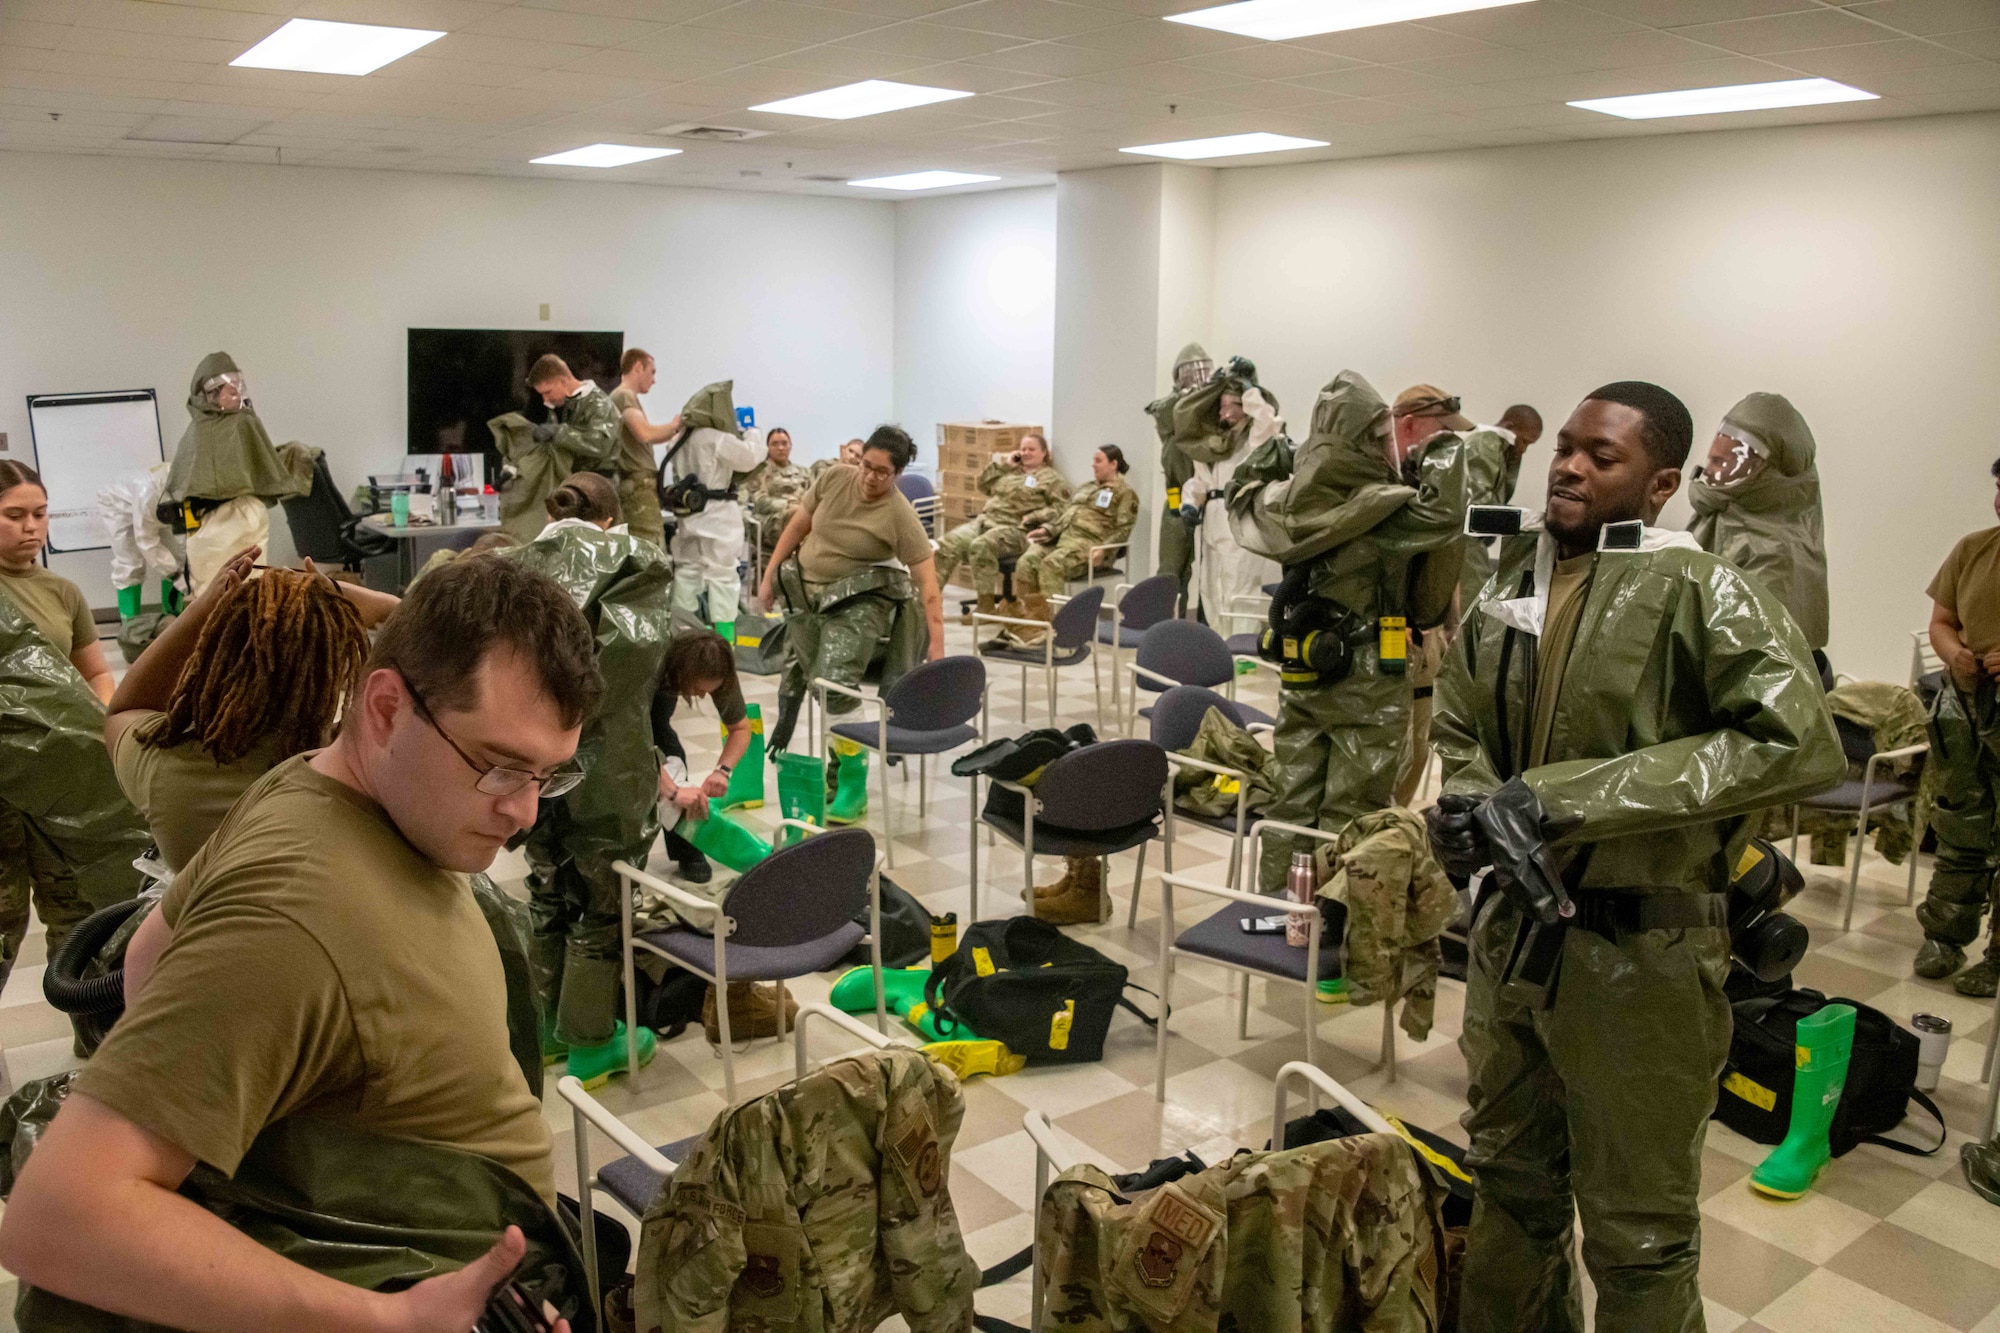 In-Place Patient Decontamination Team members suit up in preparation to perform decontamination procedures on patients that arrive for treatment. Ready Eagle I is a three-day event that builds on the previously conducted training in Ready Eagle II, focusing on gaps in capabilities and skill development.